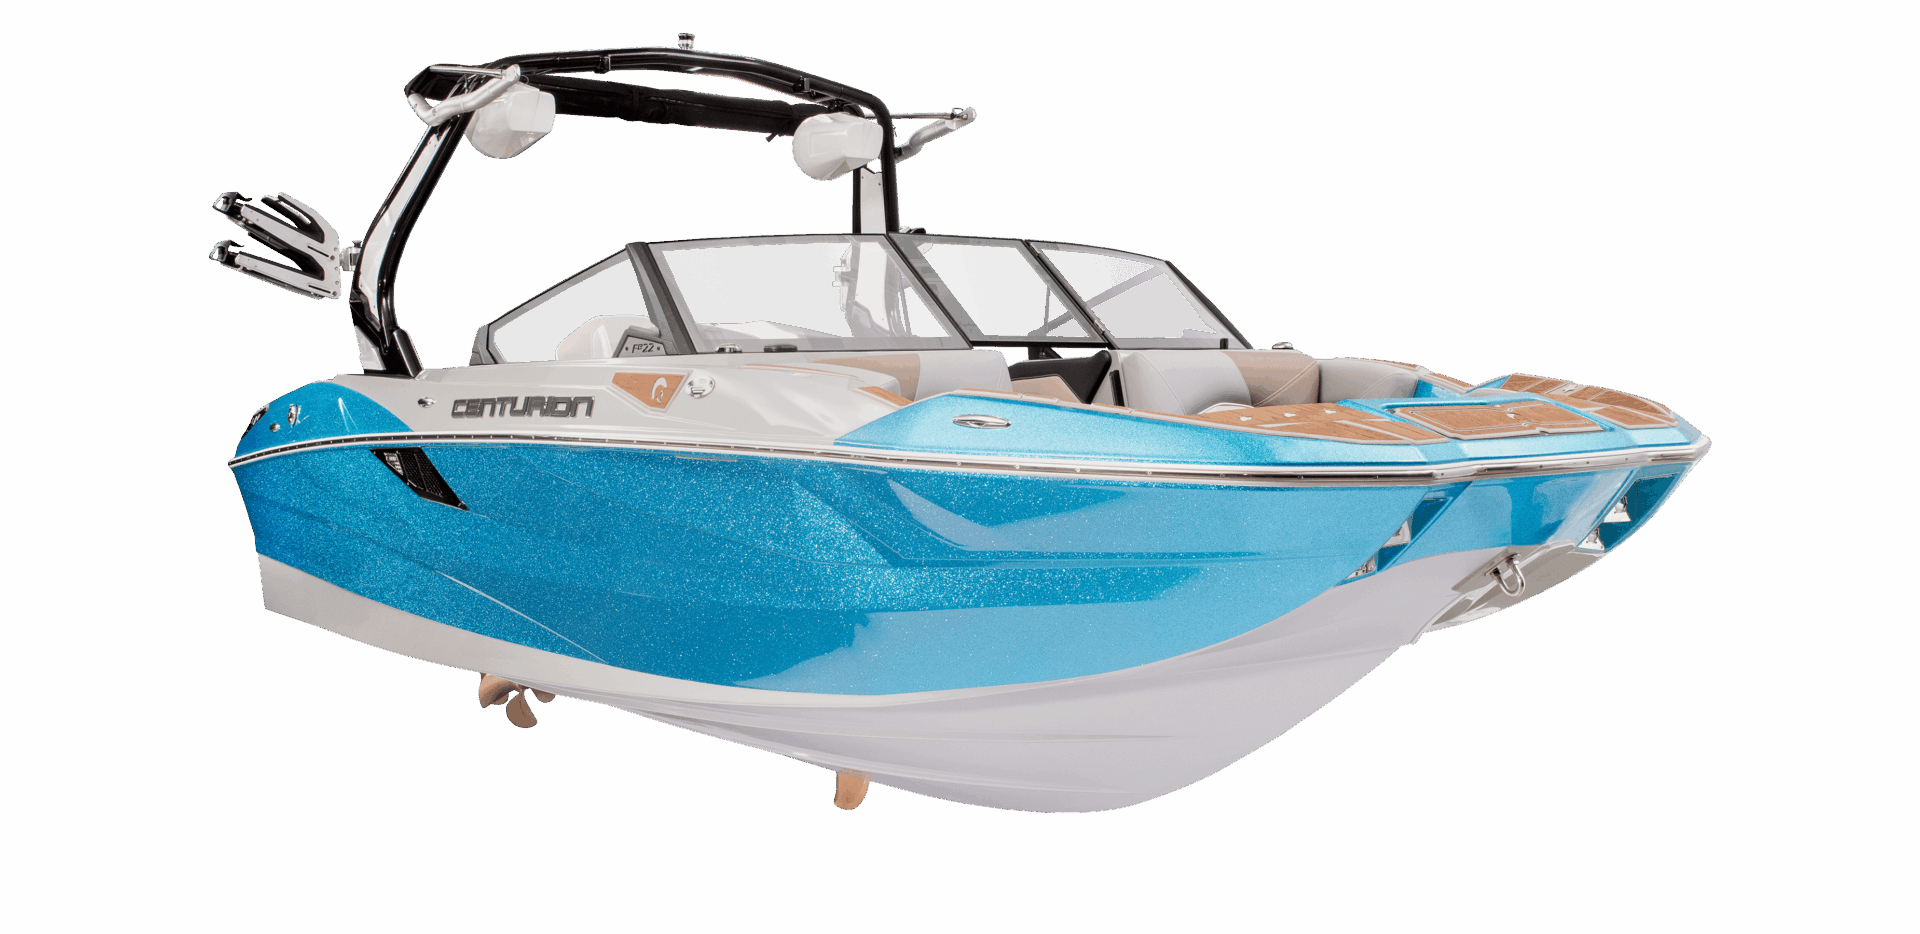 A blue and white Centurion Fe22 motorboat with a black wakeboard tower and cushioned seating. It features a glass windshield and wood accents on the interior.